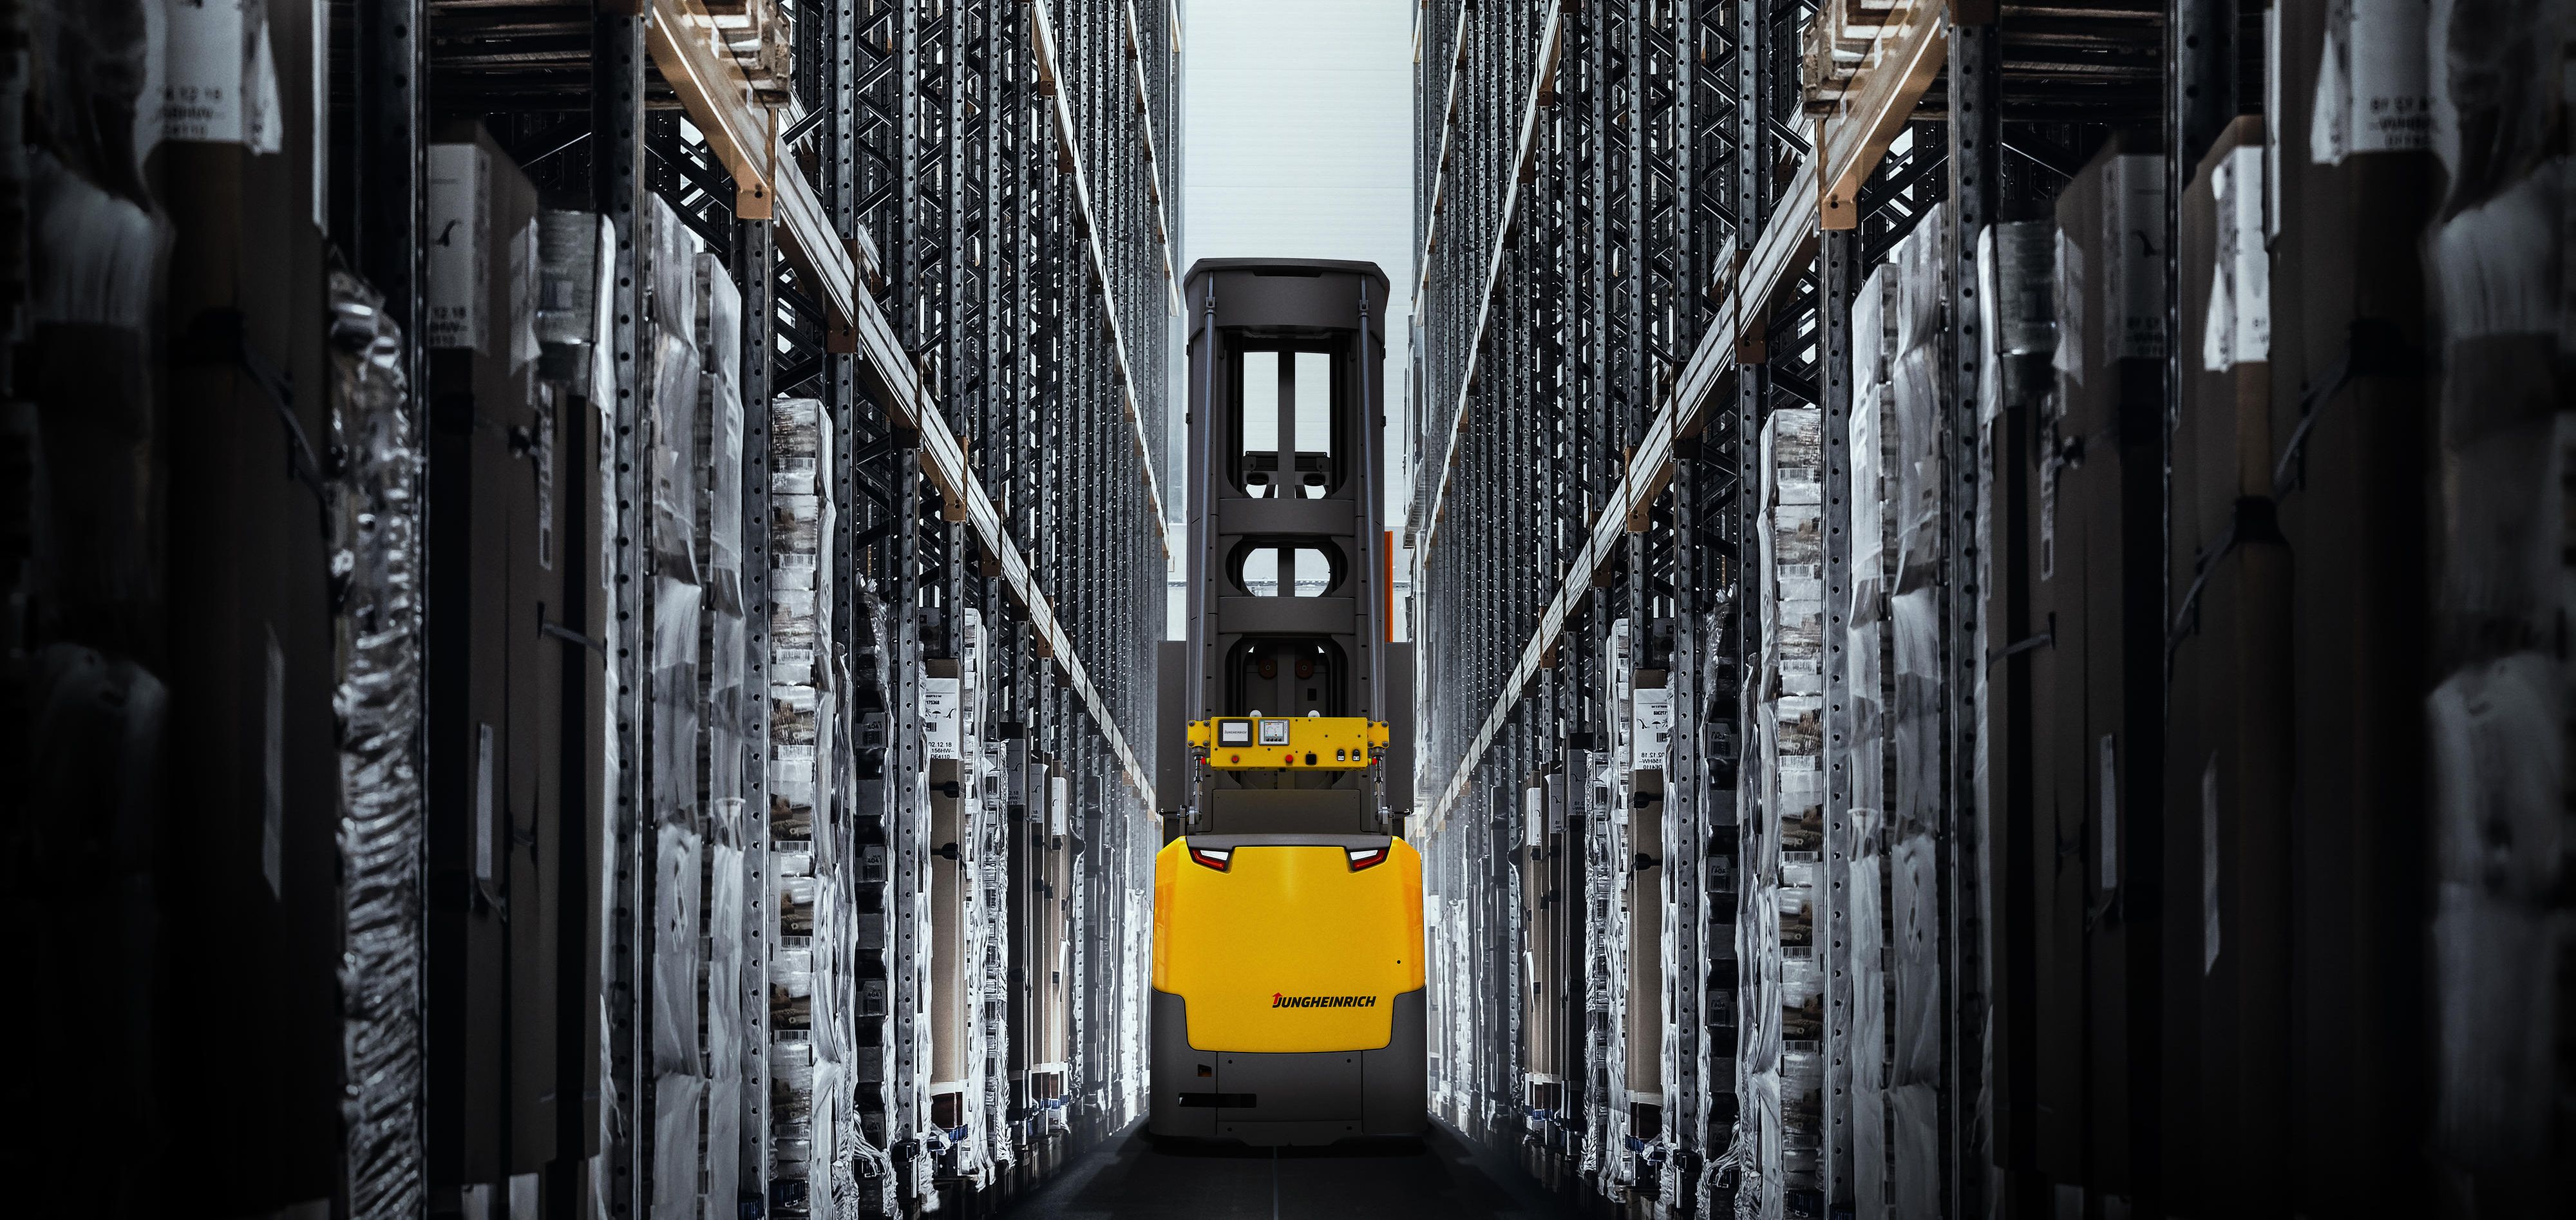 Automatic high-rack stacker